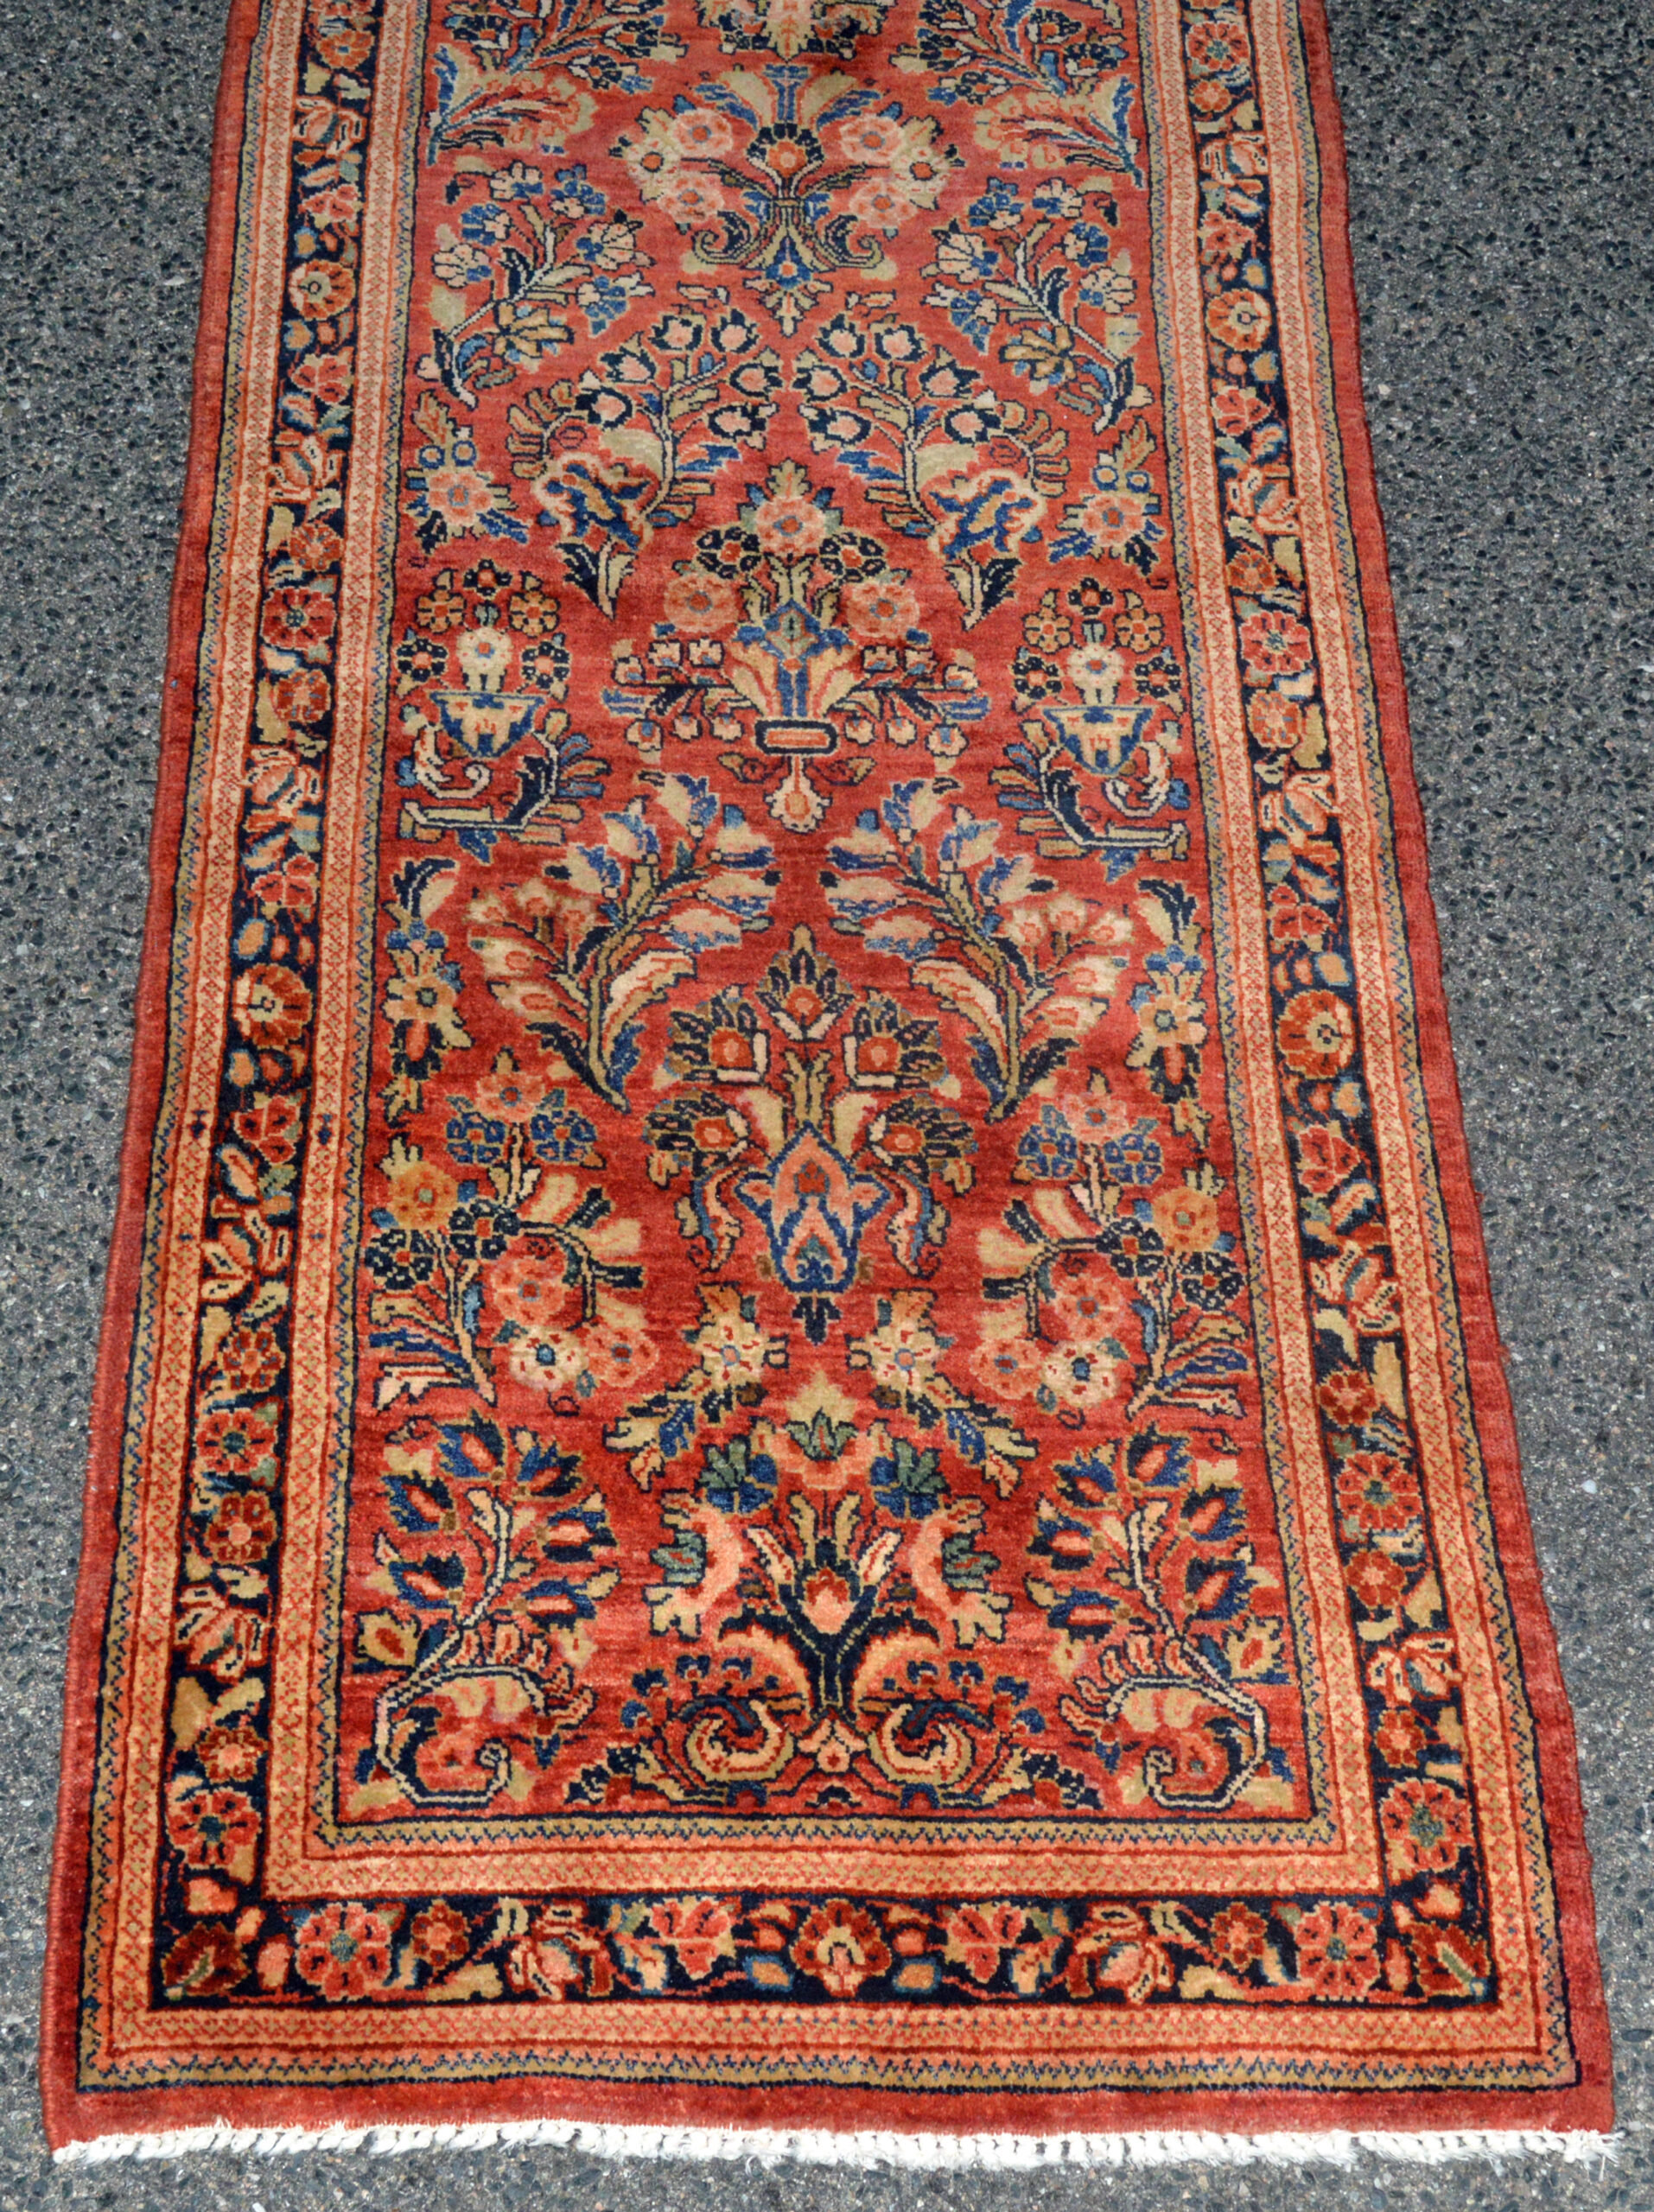 Field and border detail of a vintage Persian Sarouk runner rug, Douglas Stock Gallery, Oriental rugs Boston,MA area